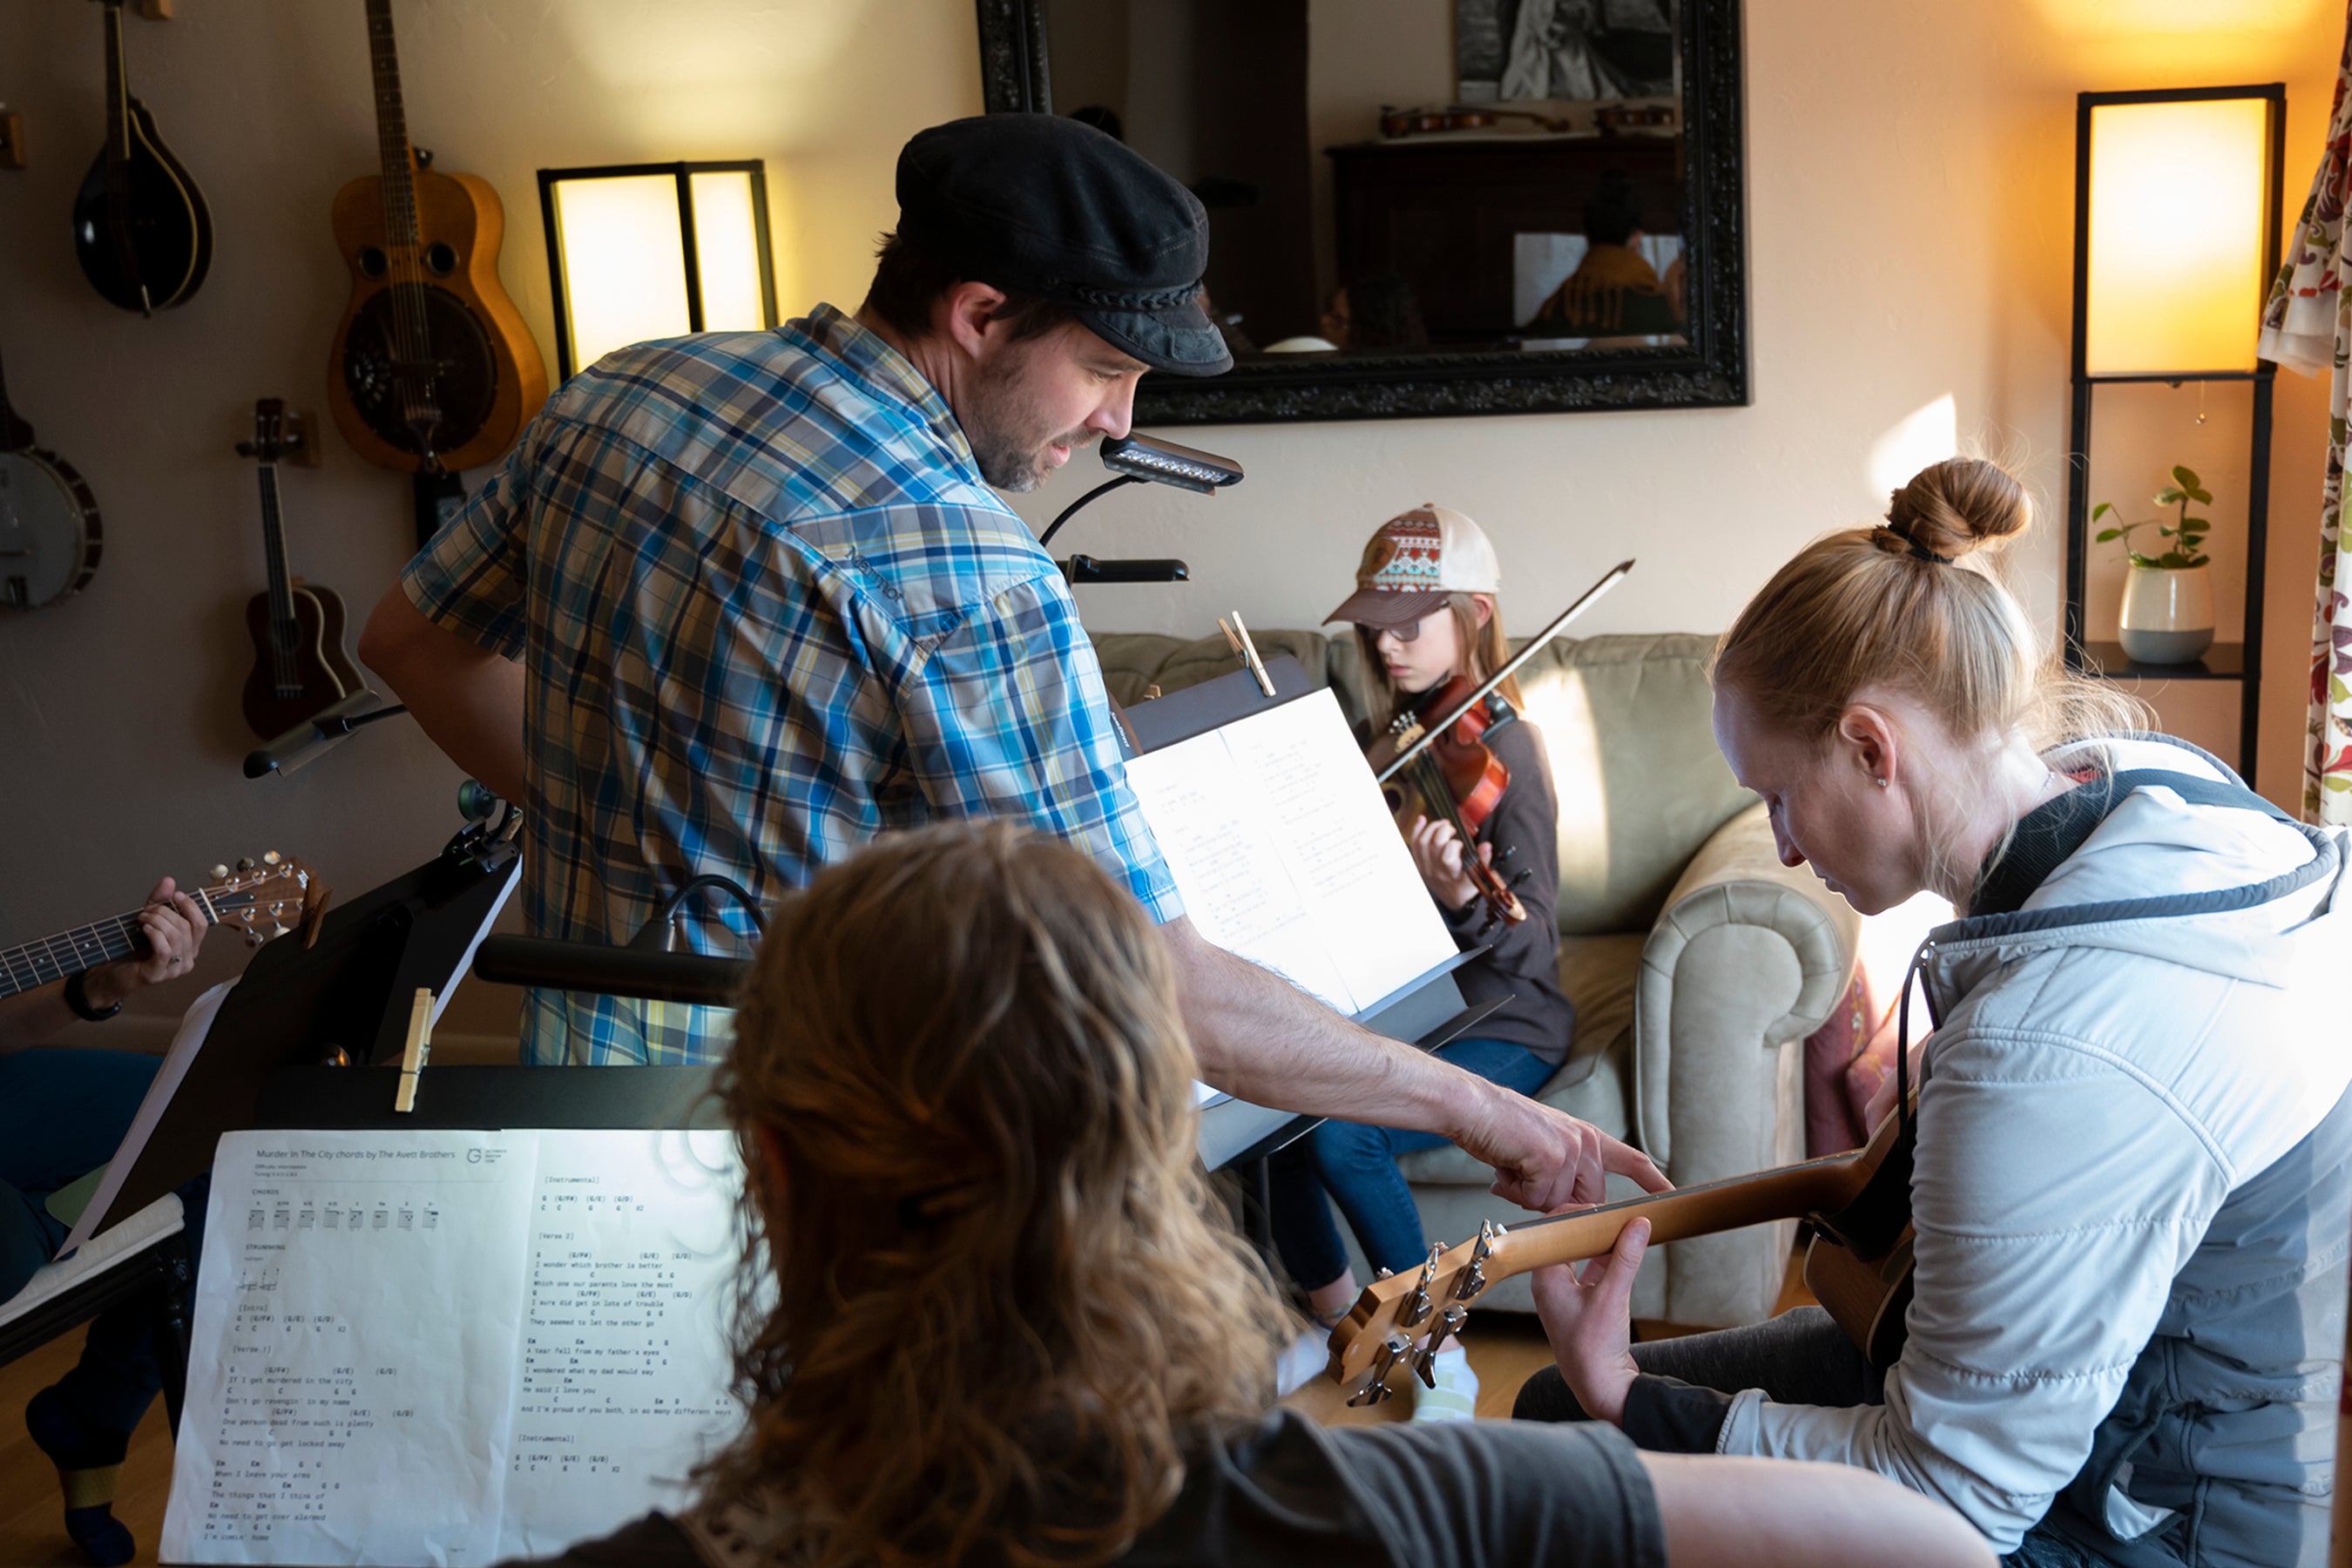 Group of people play a variety of musical instruments in a living room